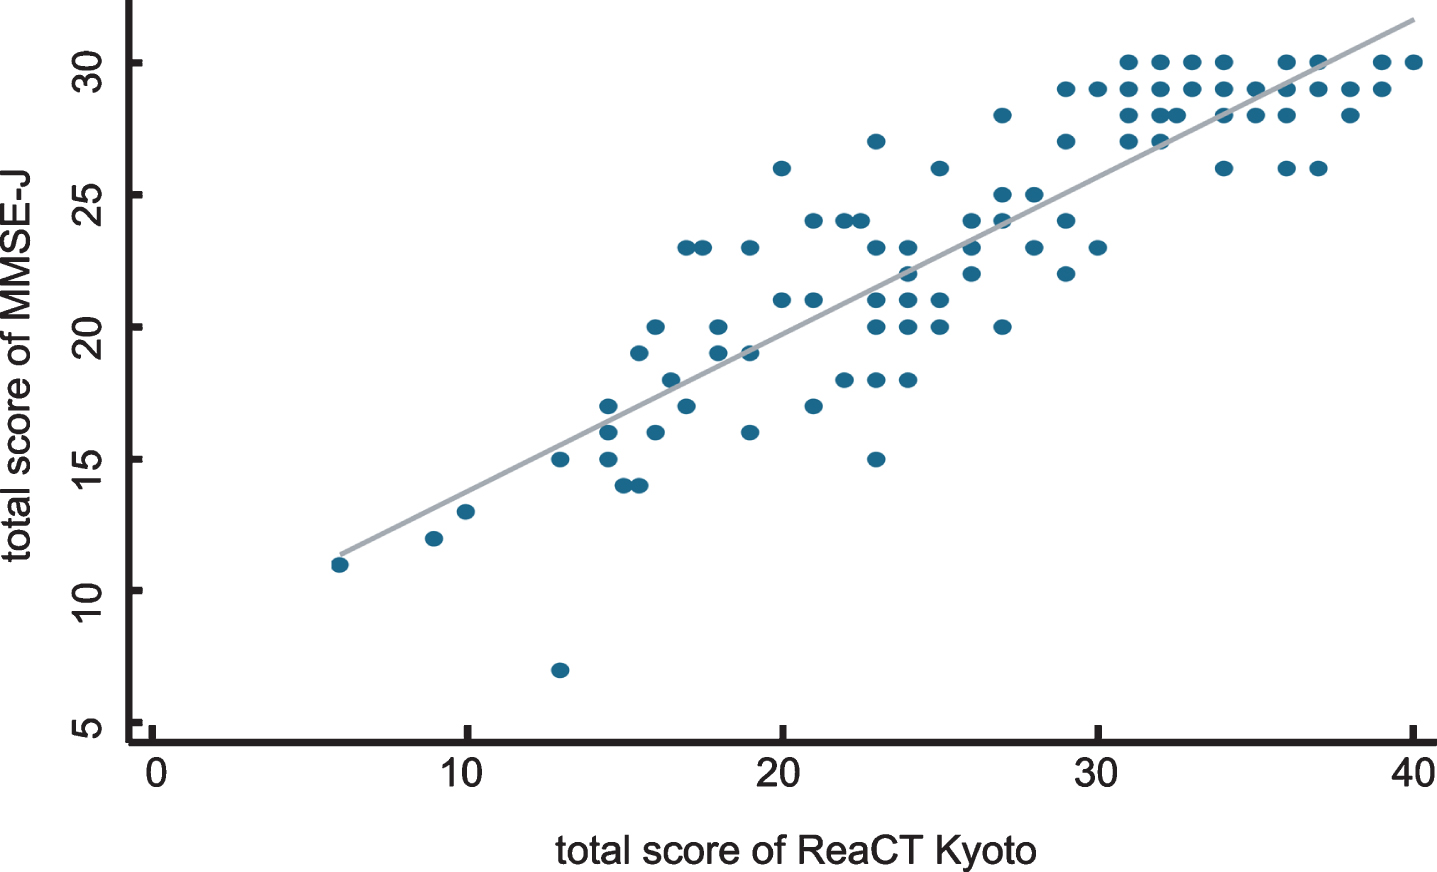 Correlations of total scores between ReaCT Kyoto Test and MMSE-J. A strong correlation was observed between the scores of the MMSE-J and ReaCT Kyoto Test (r = 0.90).